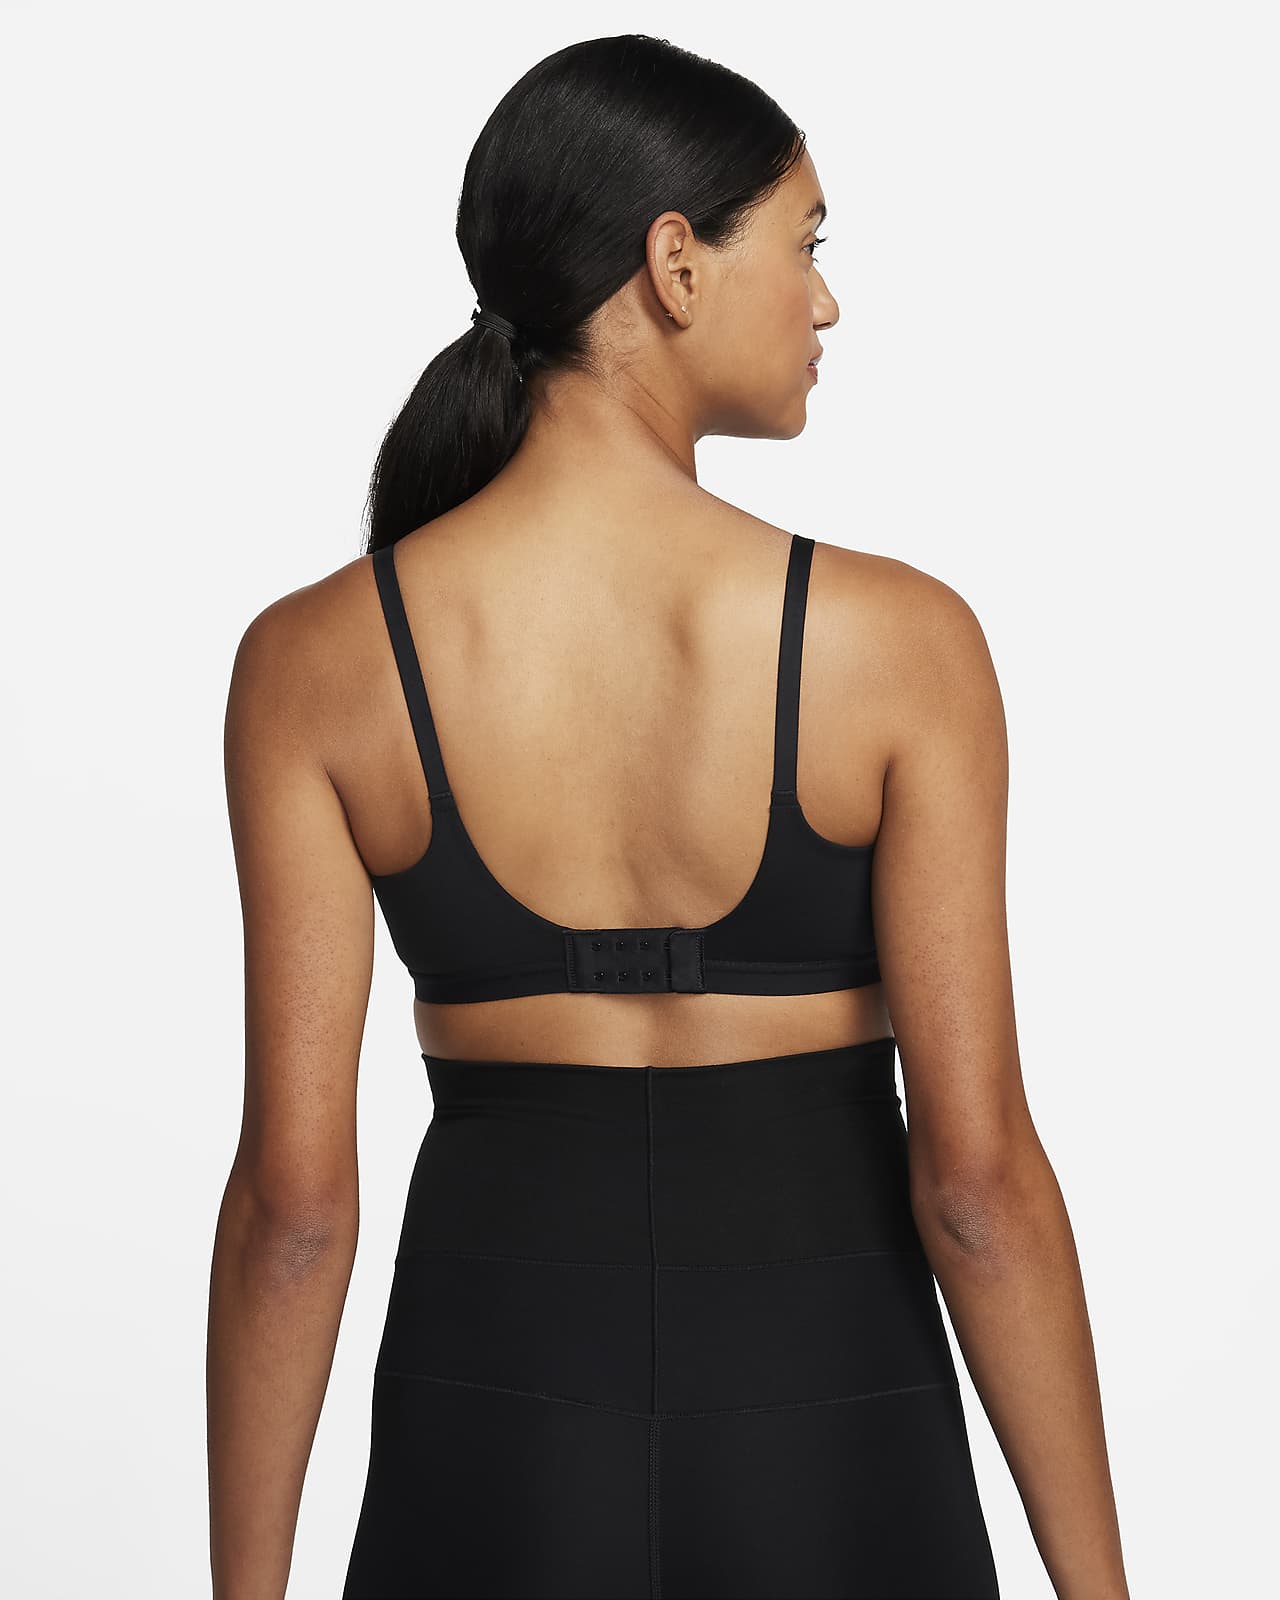 This Playtex Bra Is On Sale For Up To 74% Off—Shop It On